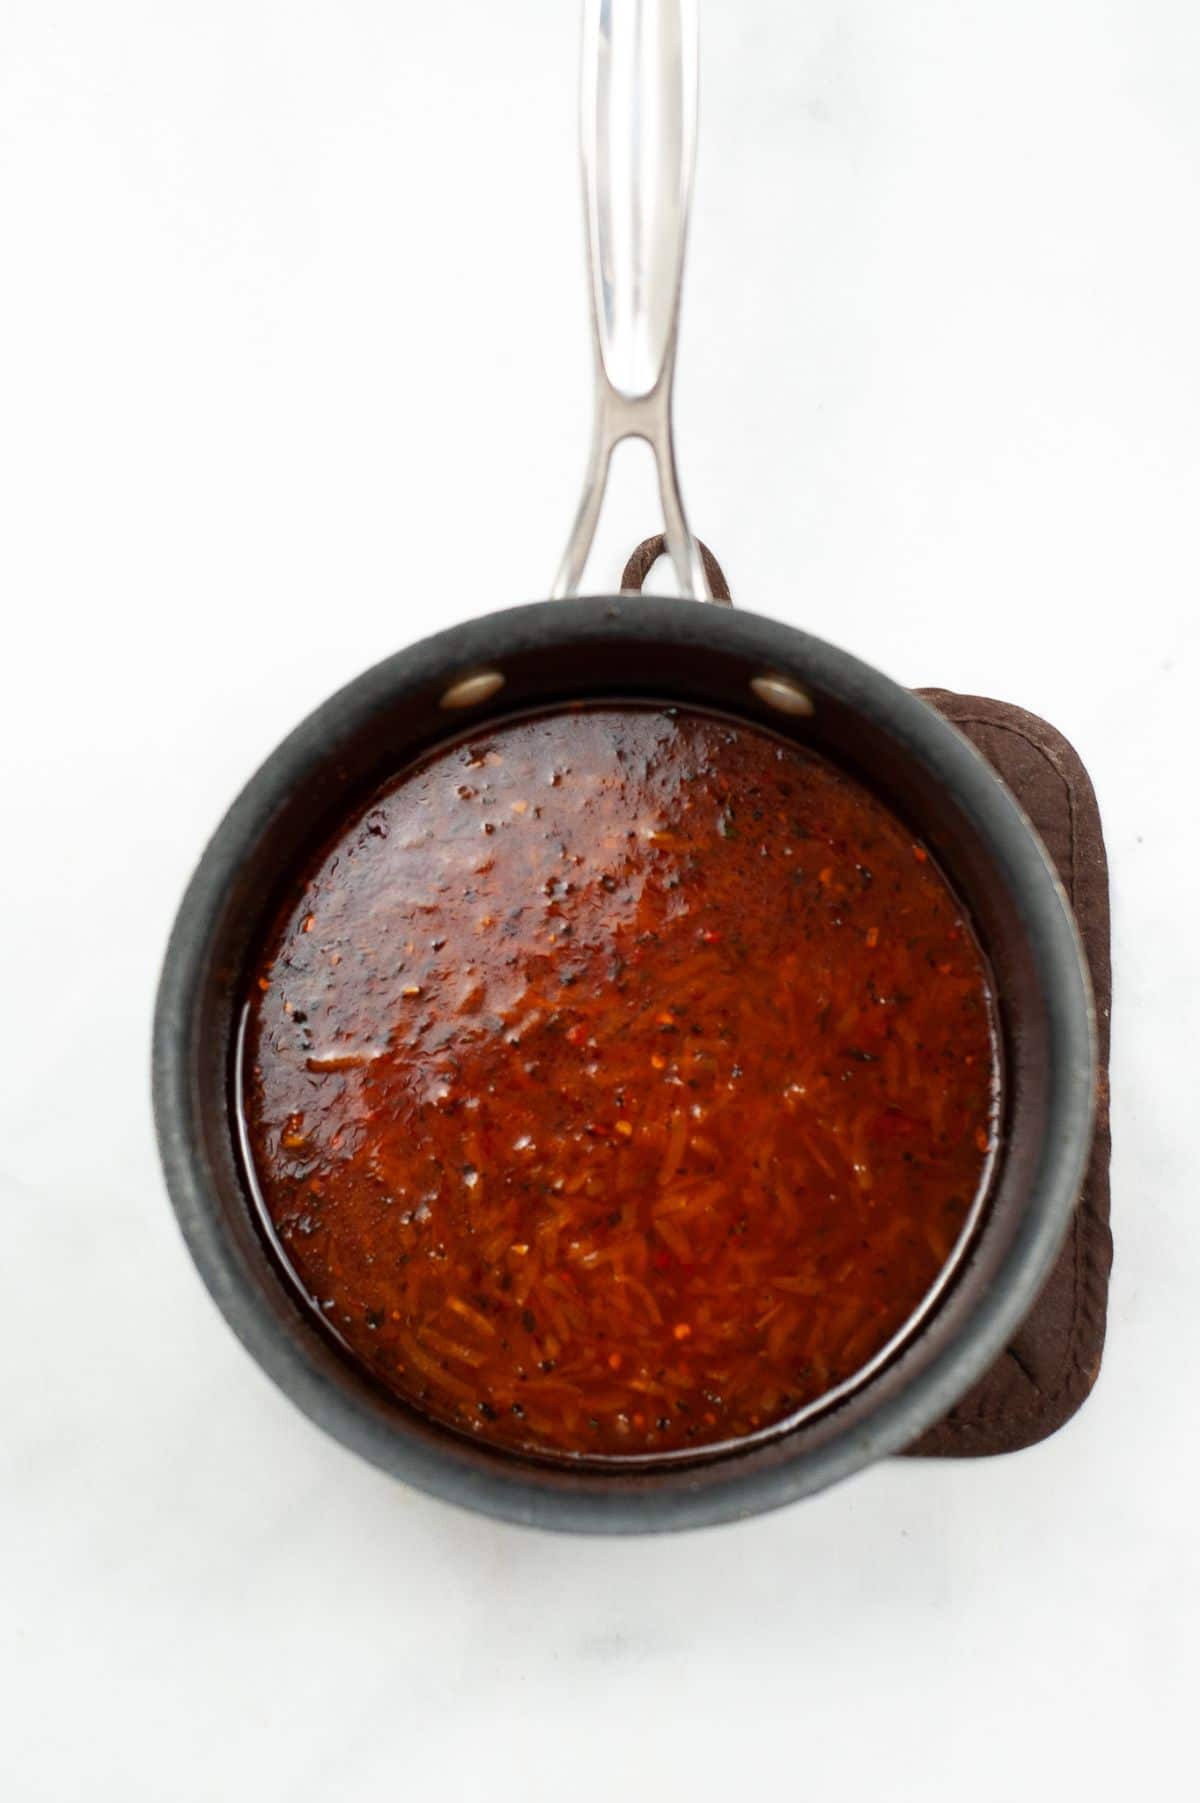 Sauce being cooked in a saucepan.